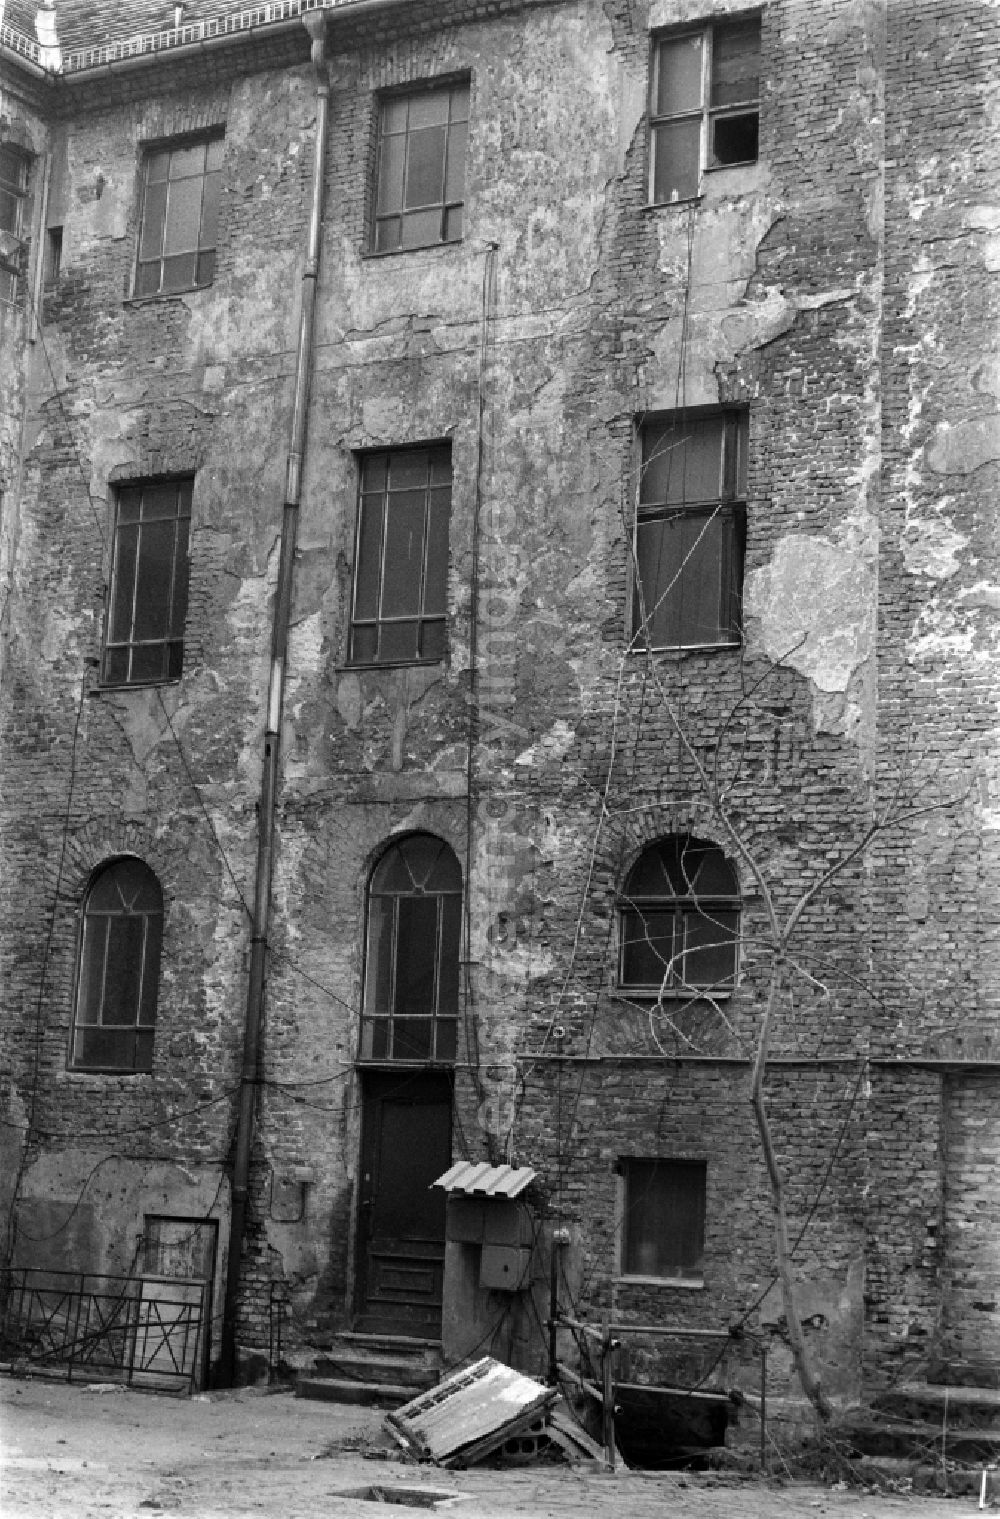 GDR photo archive: Berlin - View of the backyard of a ruinous old building in Berlin - Mitte, the former capital of the GDR, German Democratic Republic